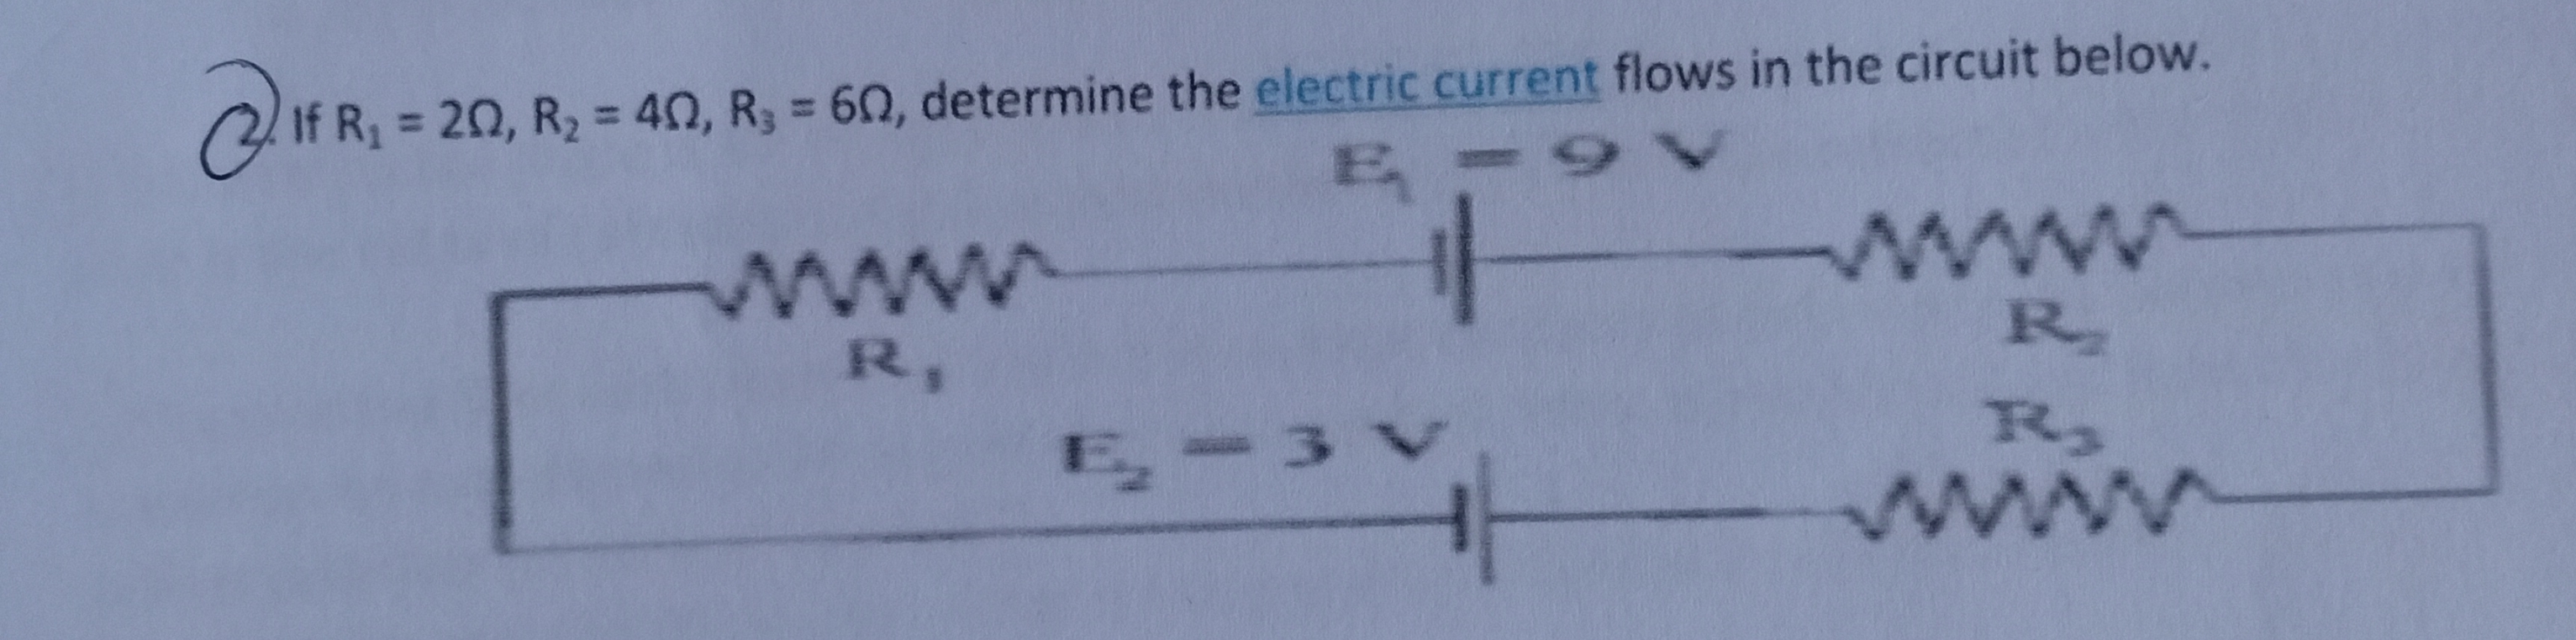 If R = 20, R2 = 40, R3 = 60, determine the electric current flows in the circuit below.
%3D
%3D
